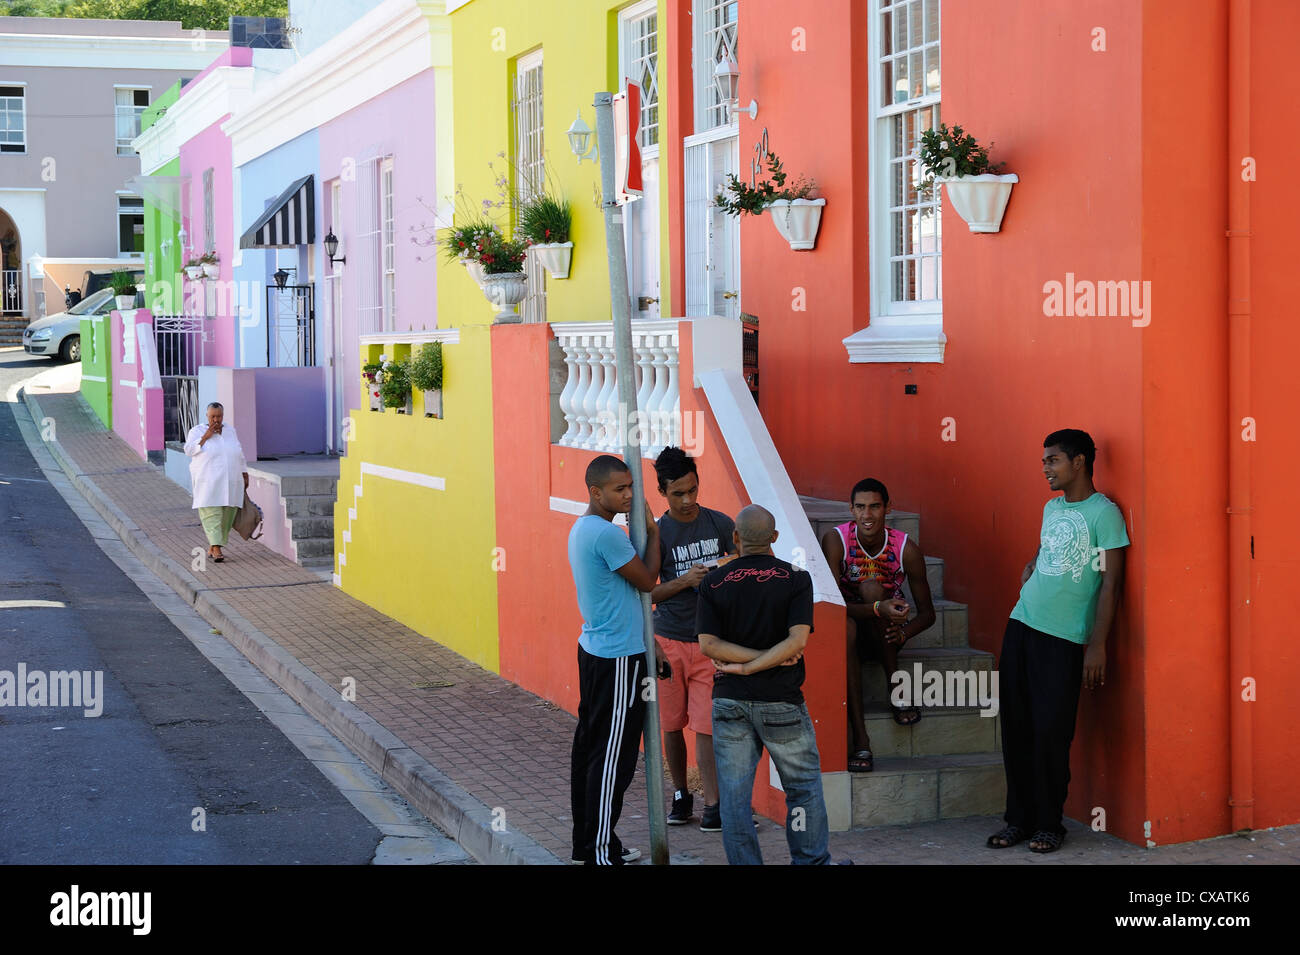 Colourful houses, Bo-Cape area, Malay inhabitants, Cape Town, South Africa, Africa Stock Photo